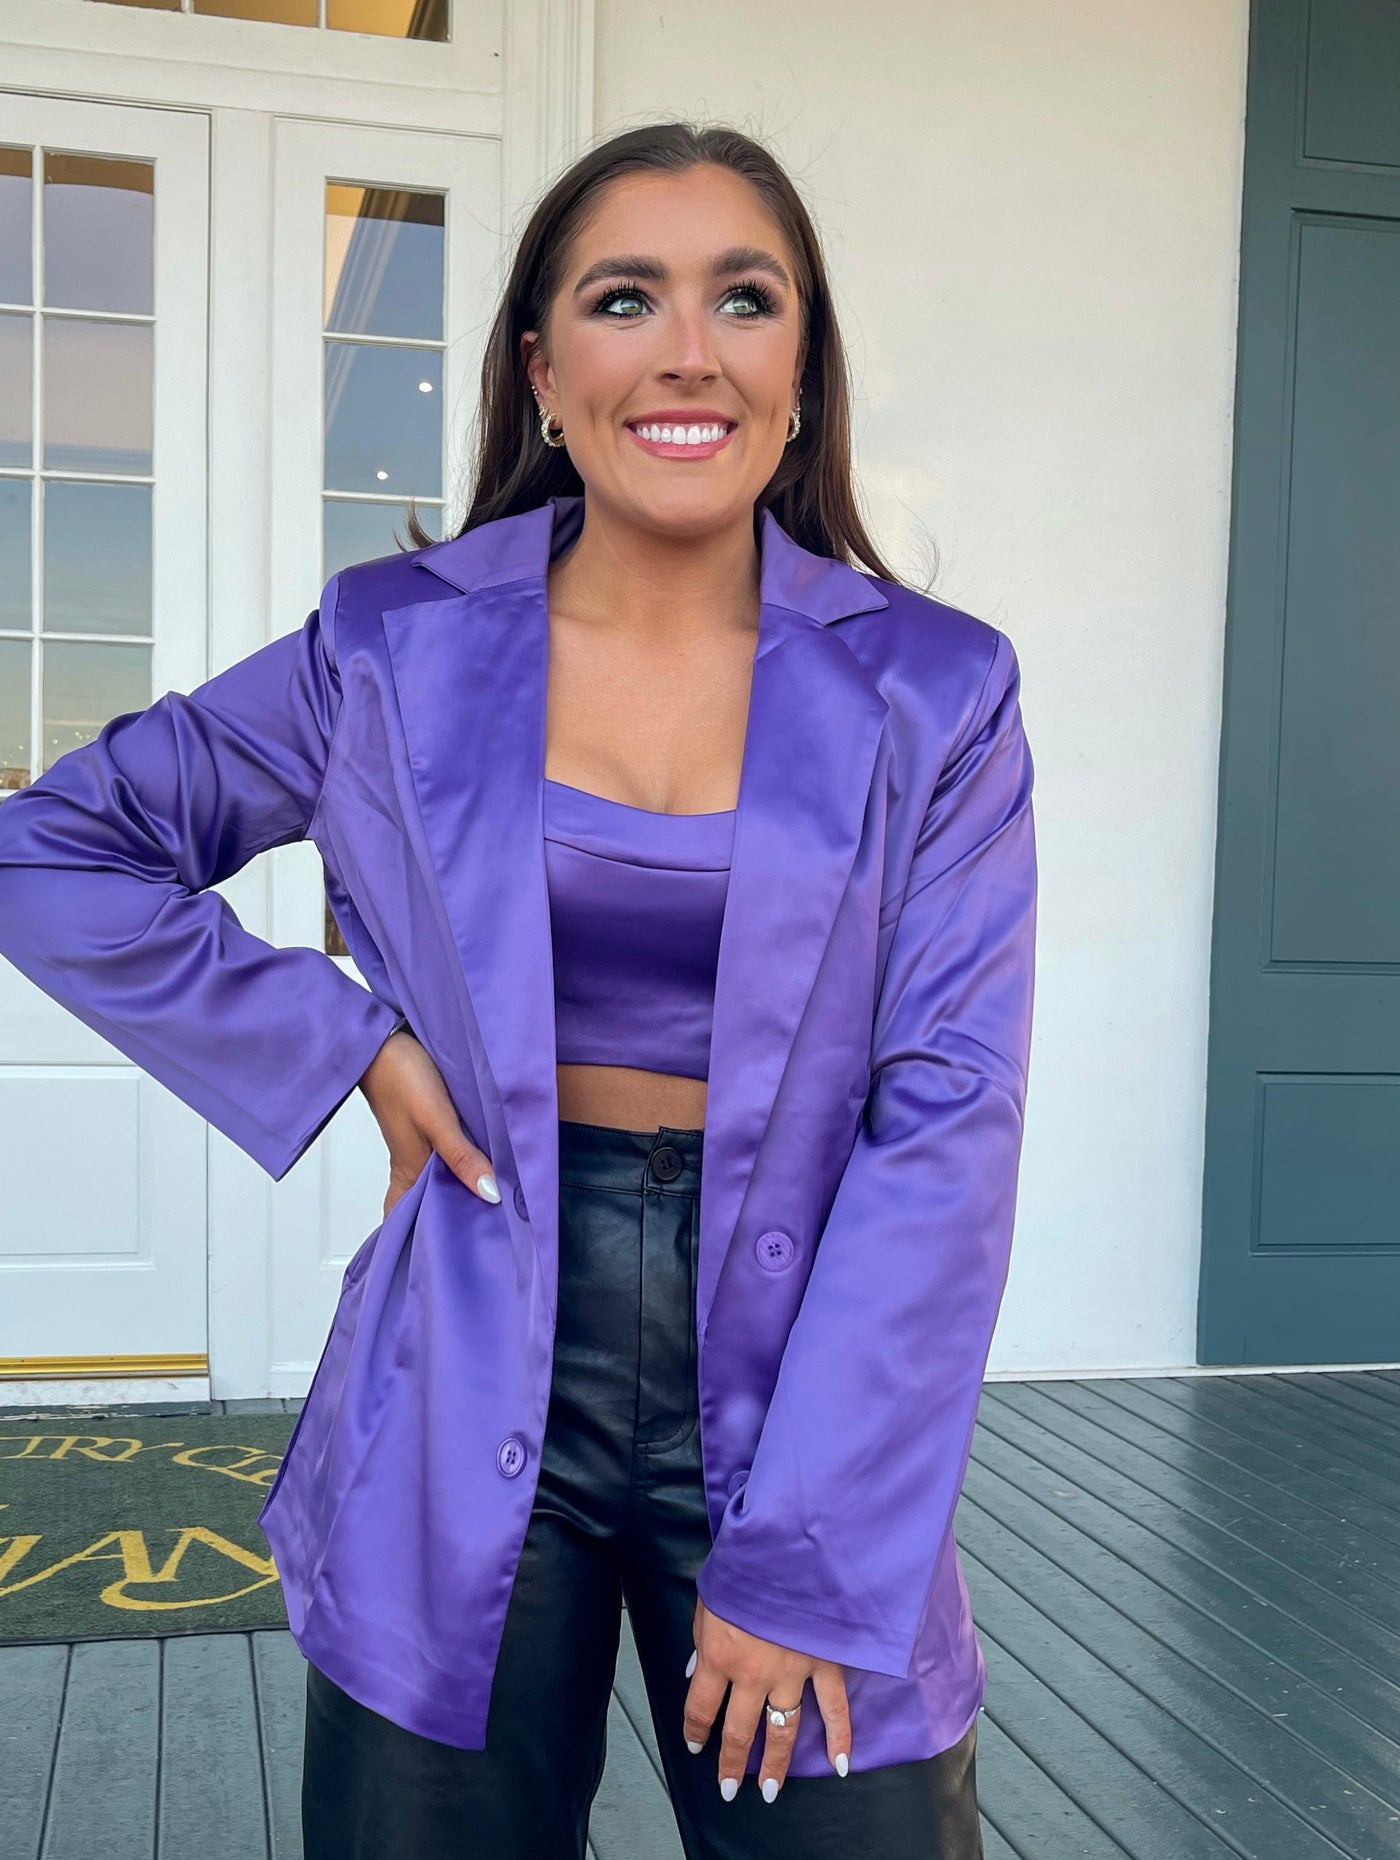 This purple crop top with matching blazer looks great with leather pants.